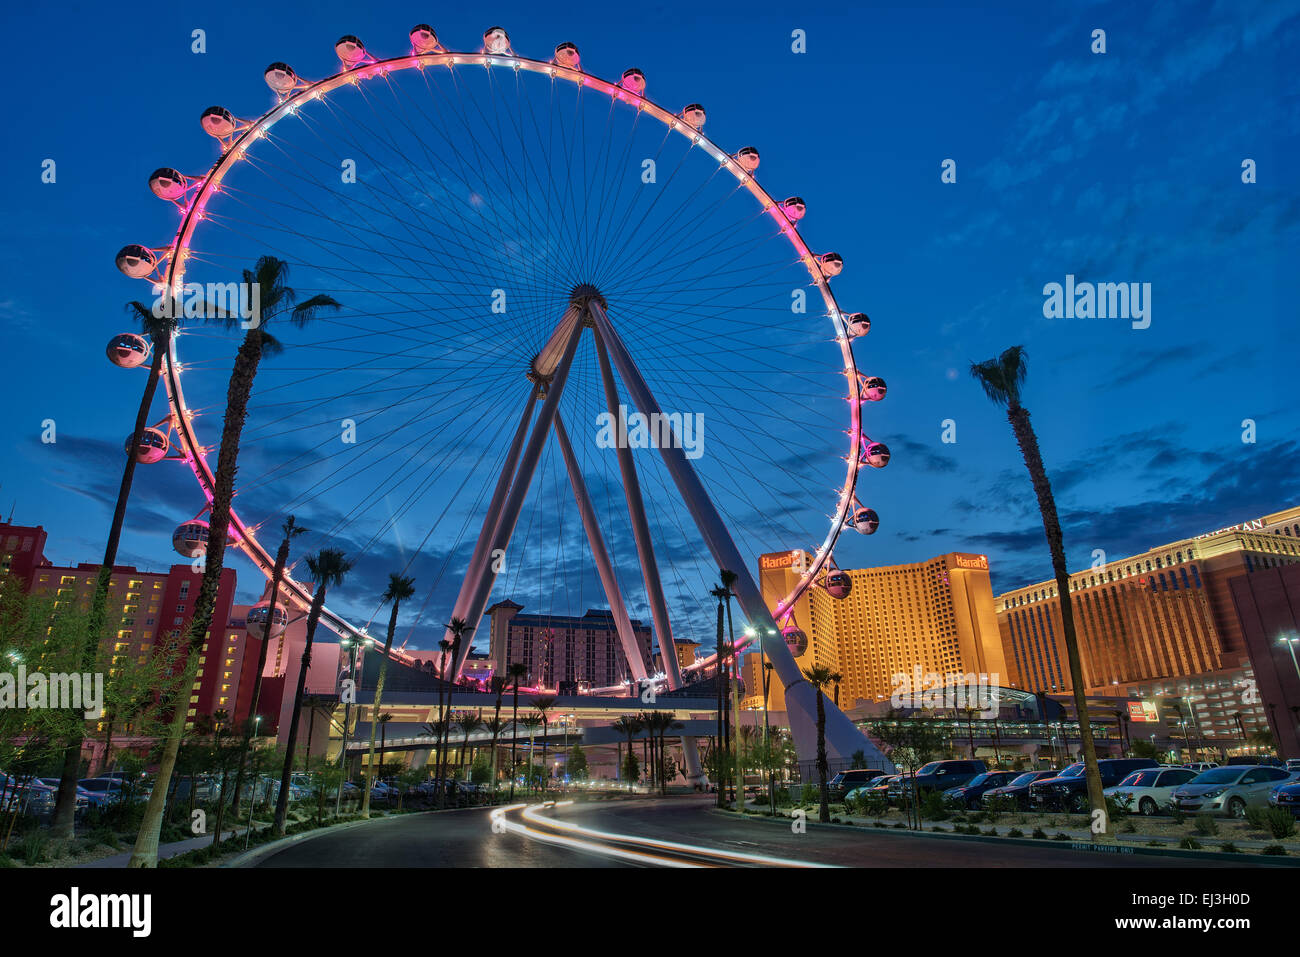 High Roller Ferris Wheel at The Linq entertainment district in Las Vegas, Nevada Stock Photo